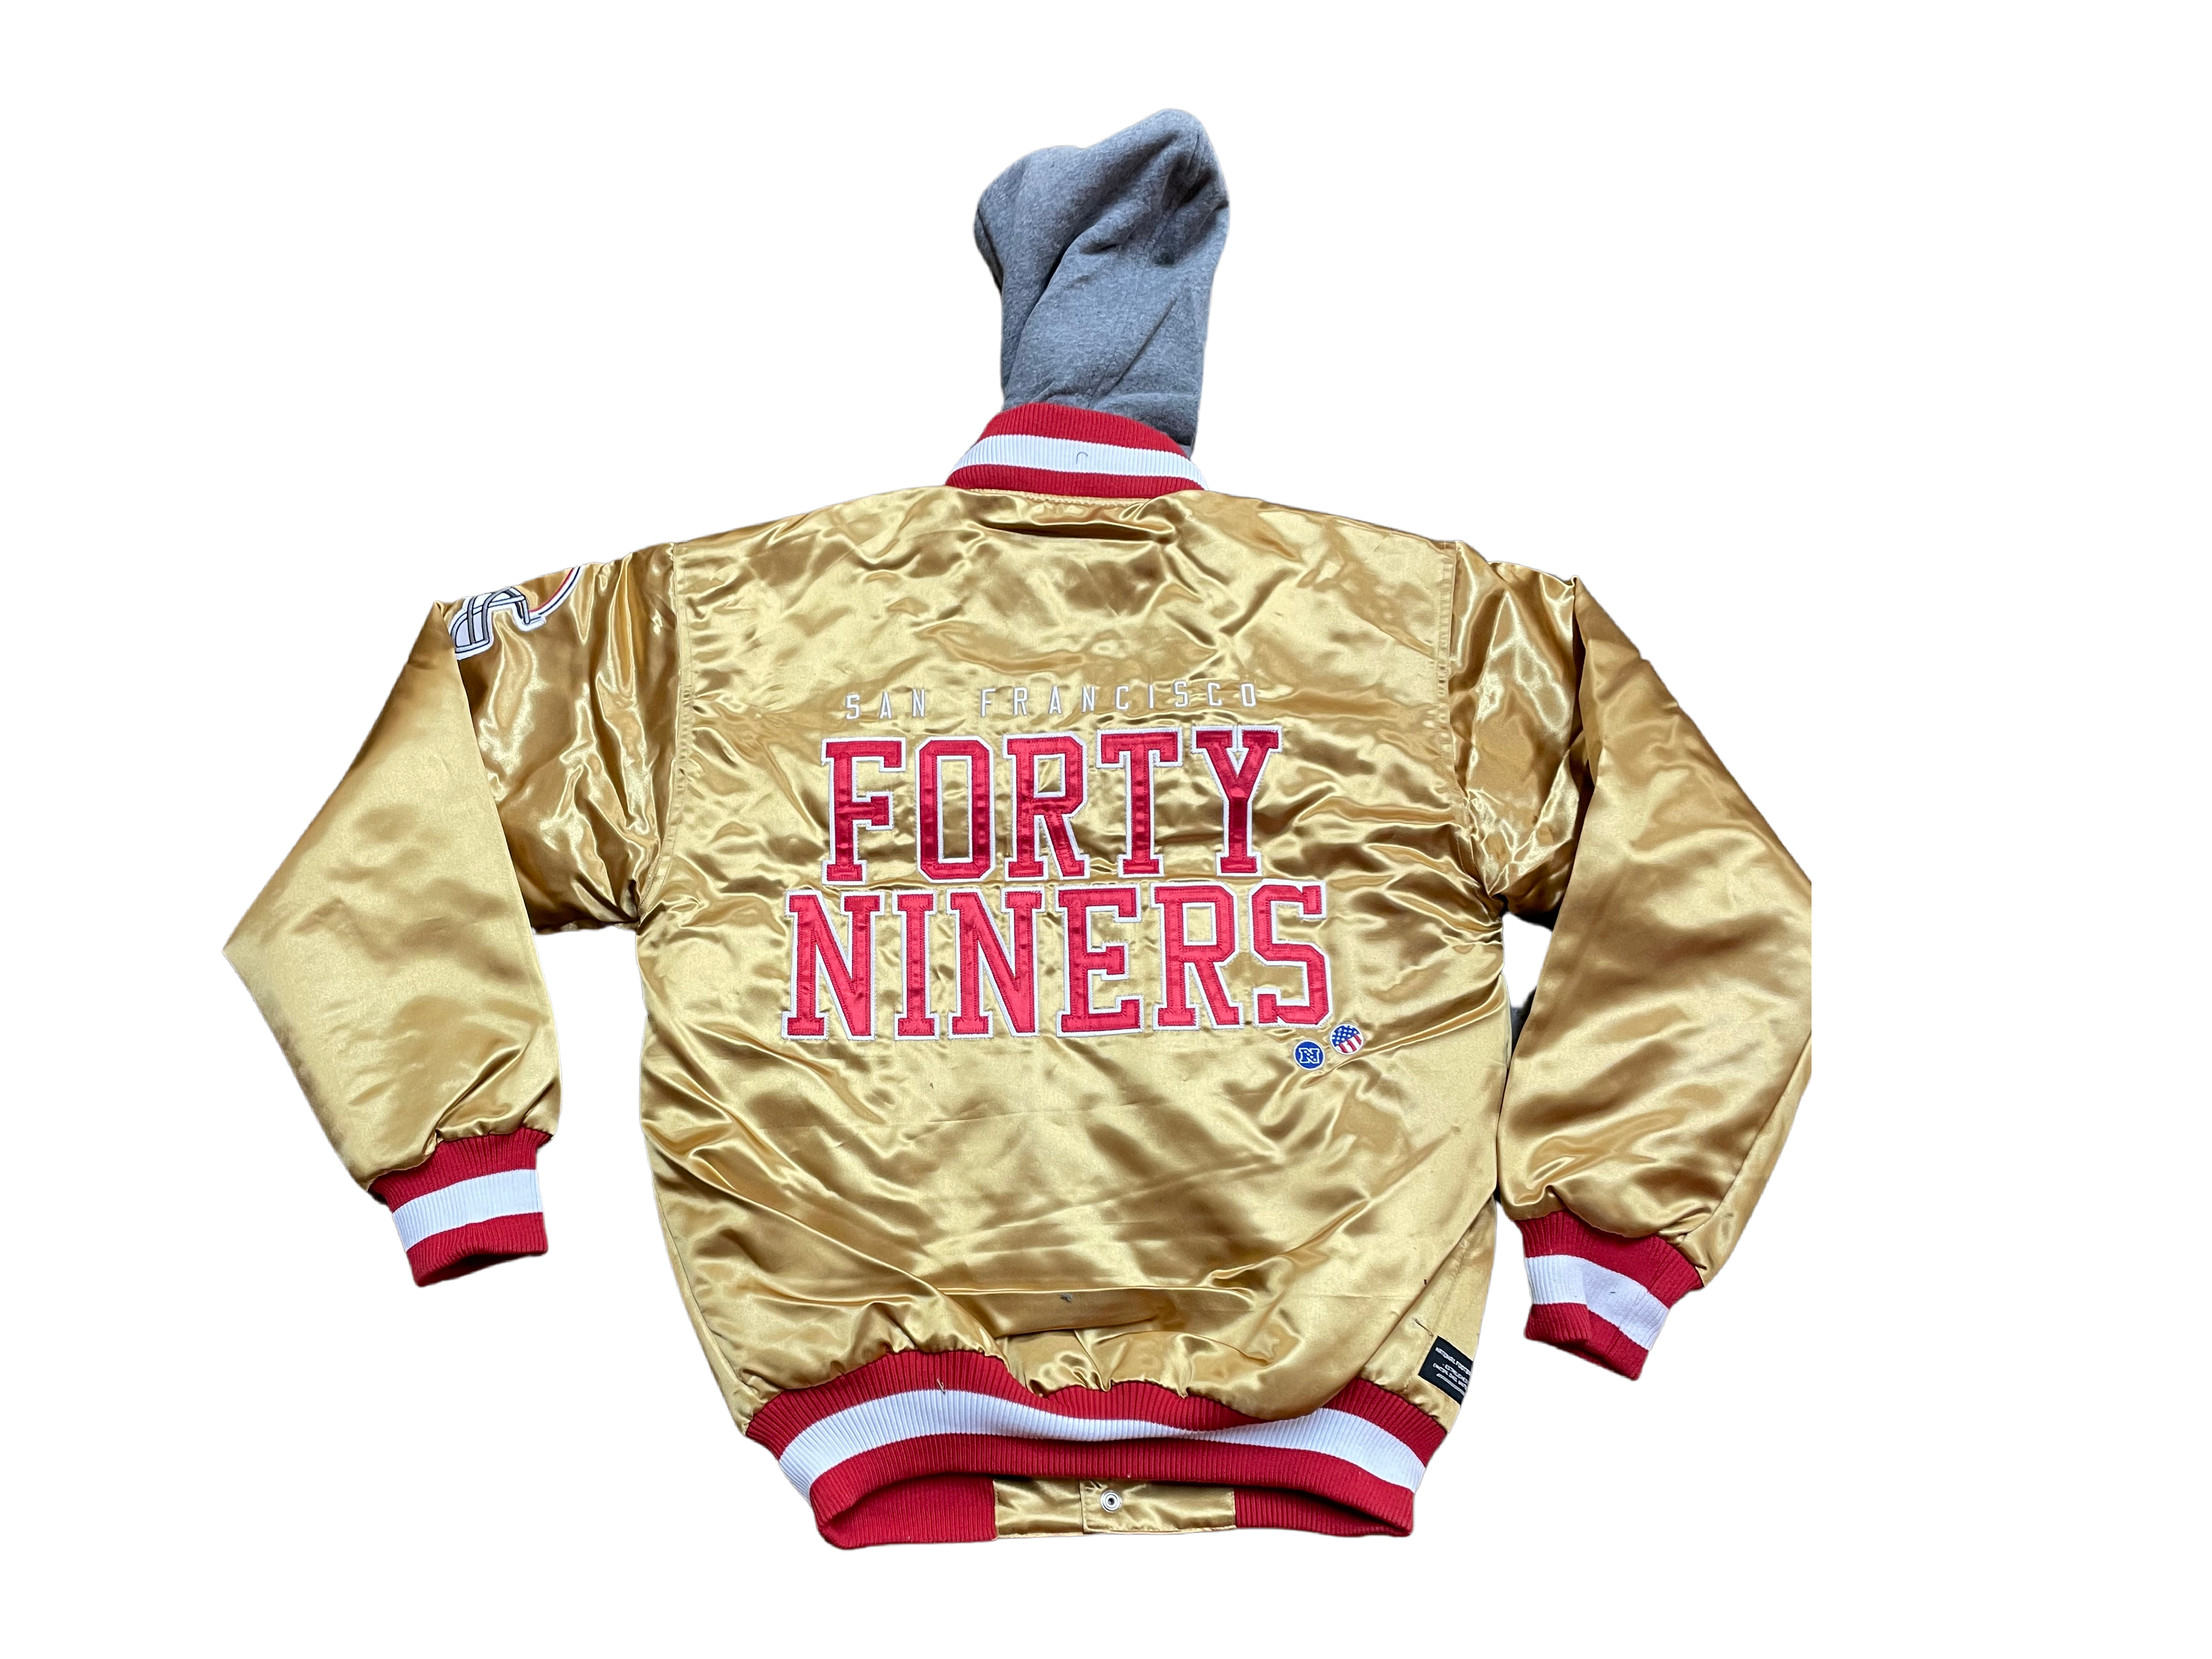 San Francisco 49ers Satin Jacket With Hoodie-Gold/Red